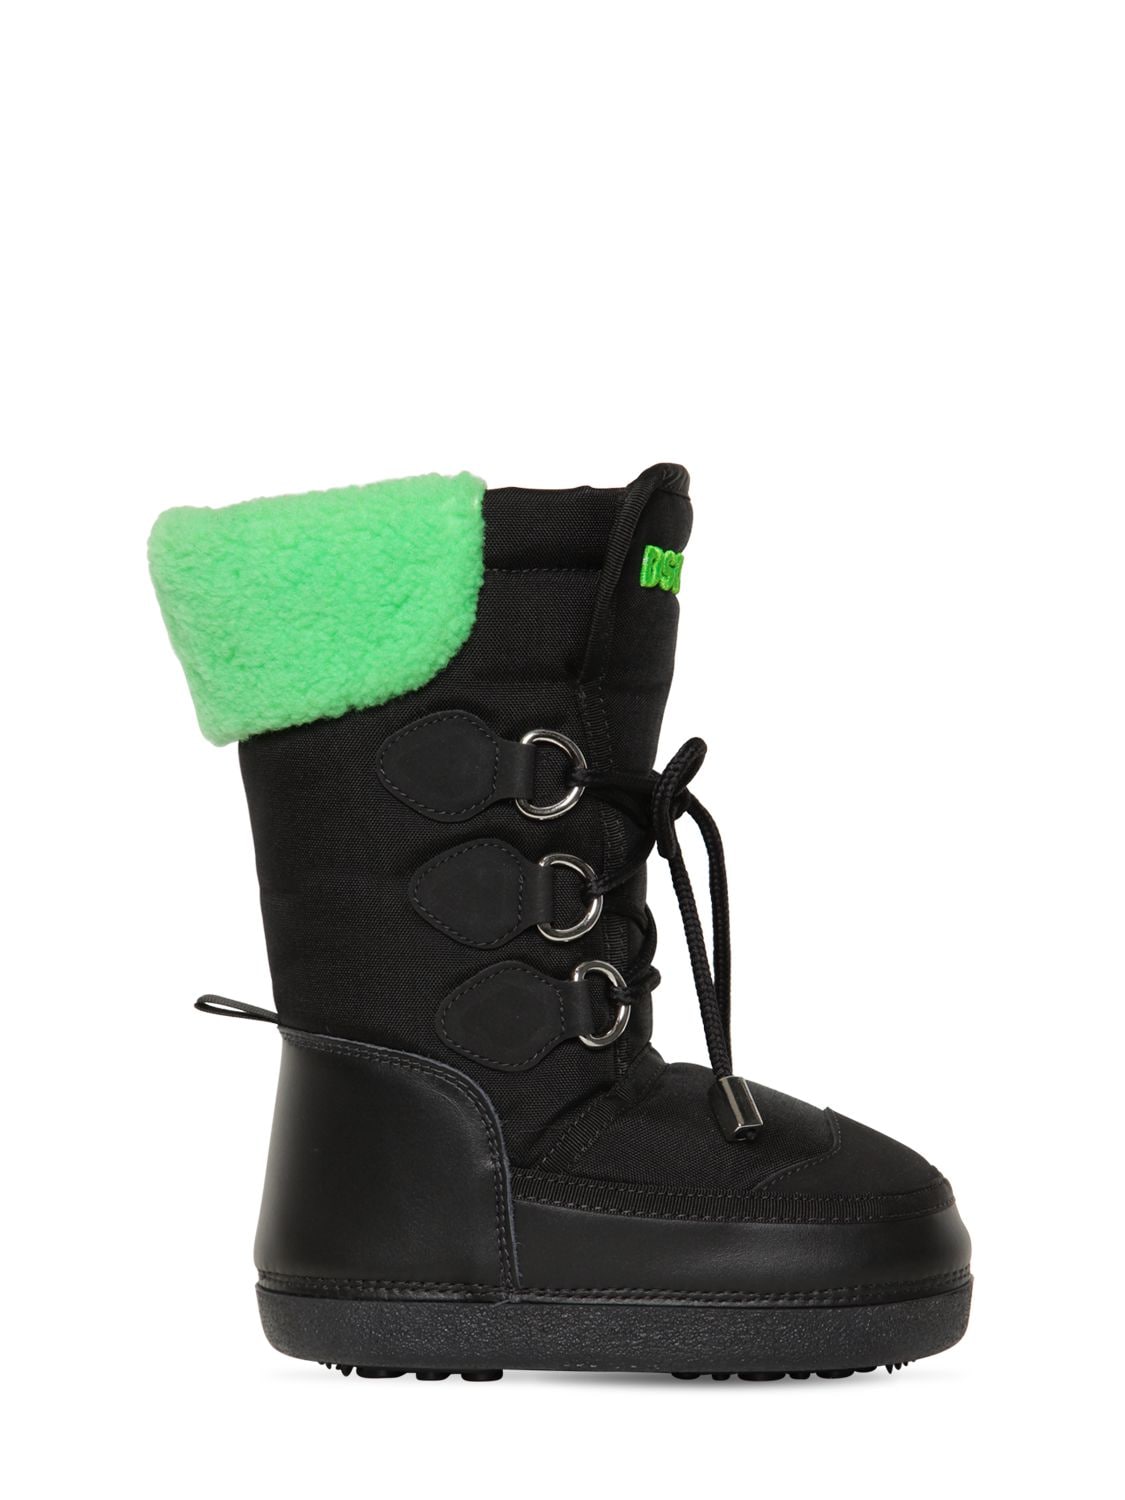 Dsquared2 Kids' Nylon & Leather Snow Boots In Black,green